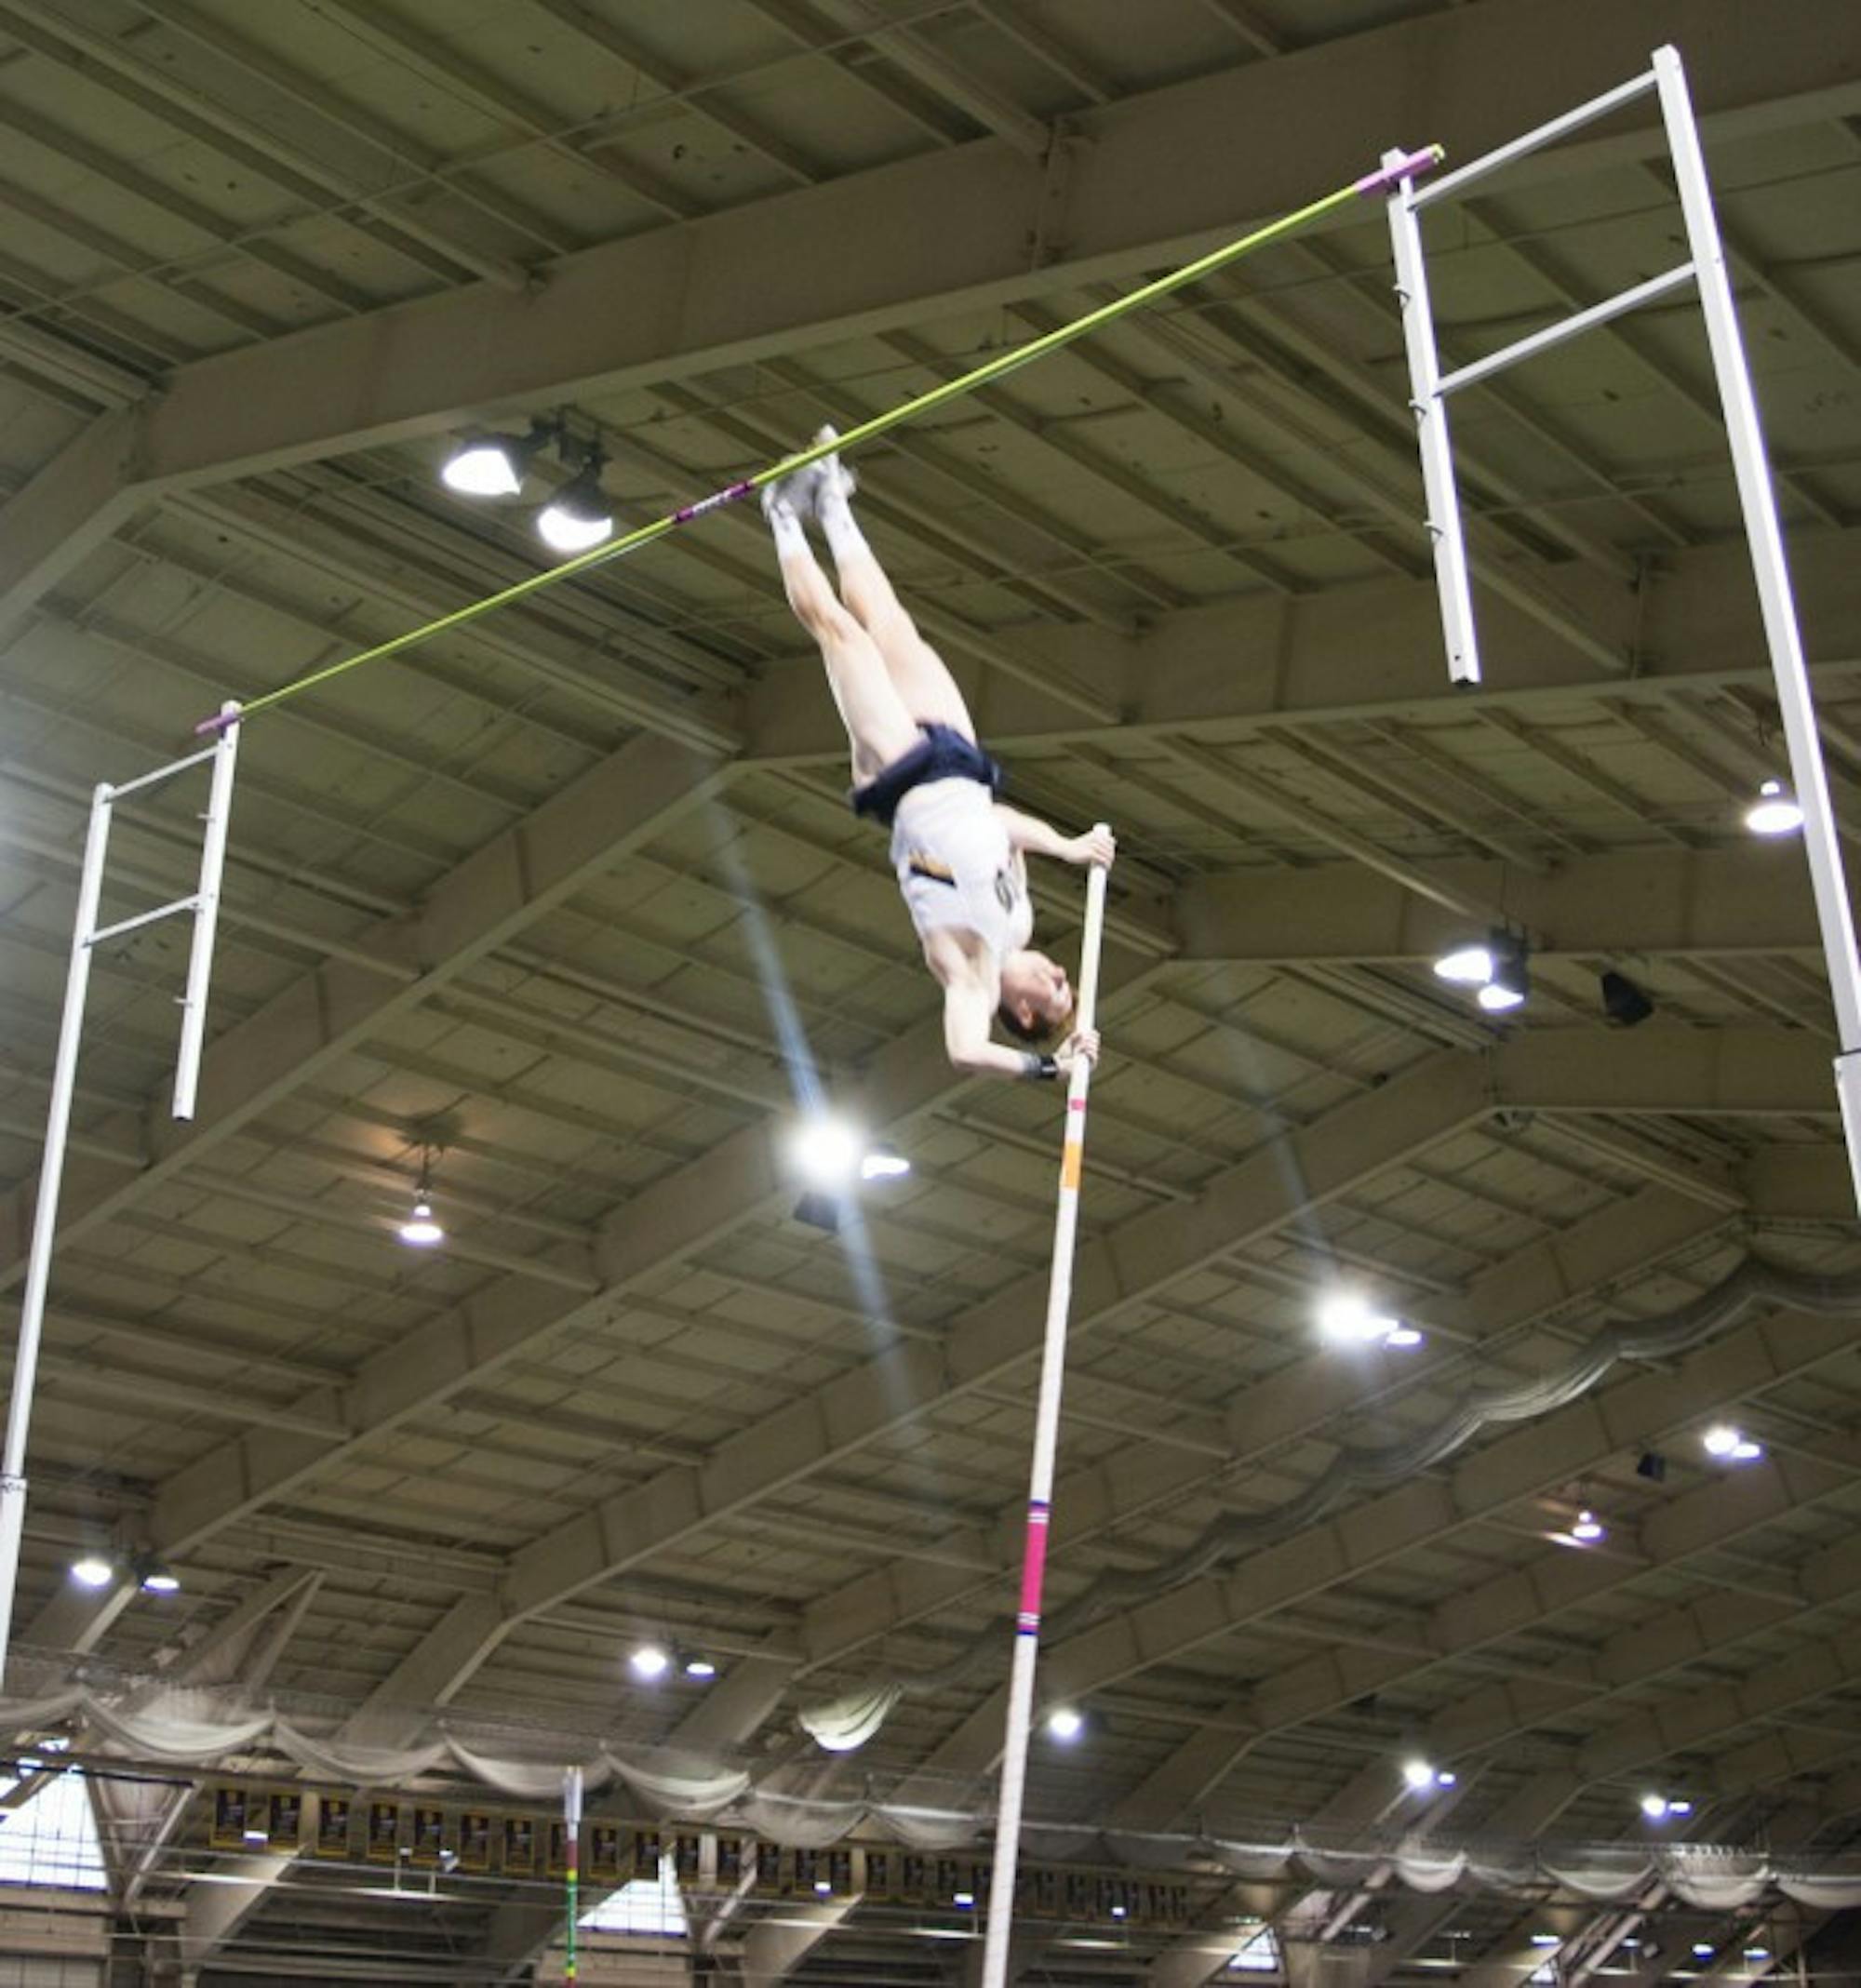 Junior Nate Richartz competes in the pole vault, which he won, at the Meyo Invitational at Loftus Sports Center on Feb. 6.